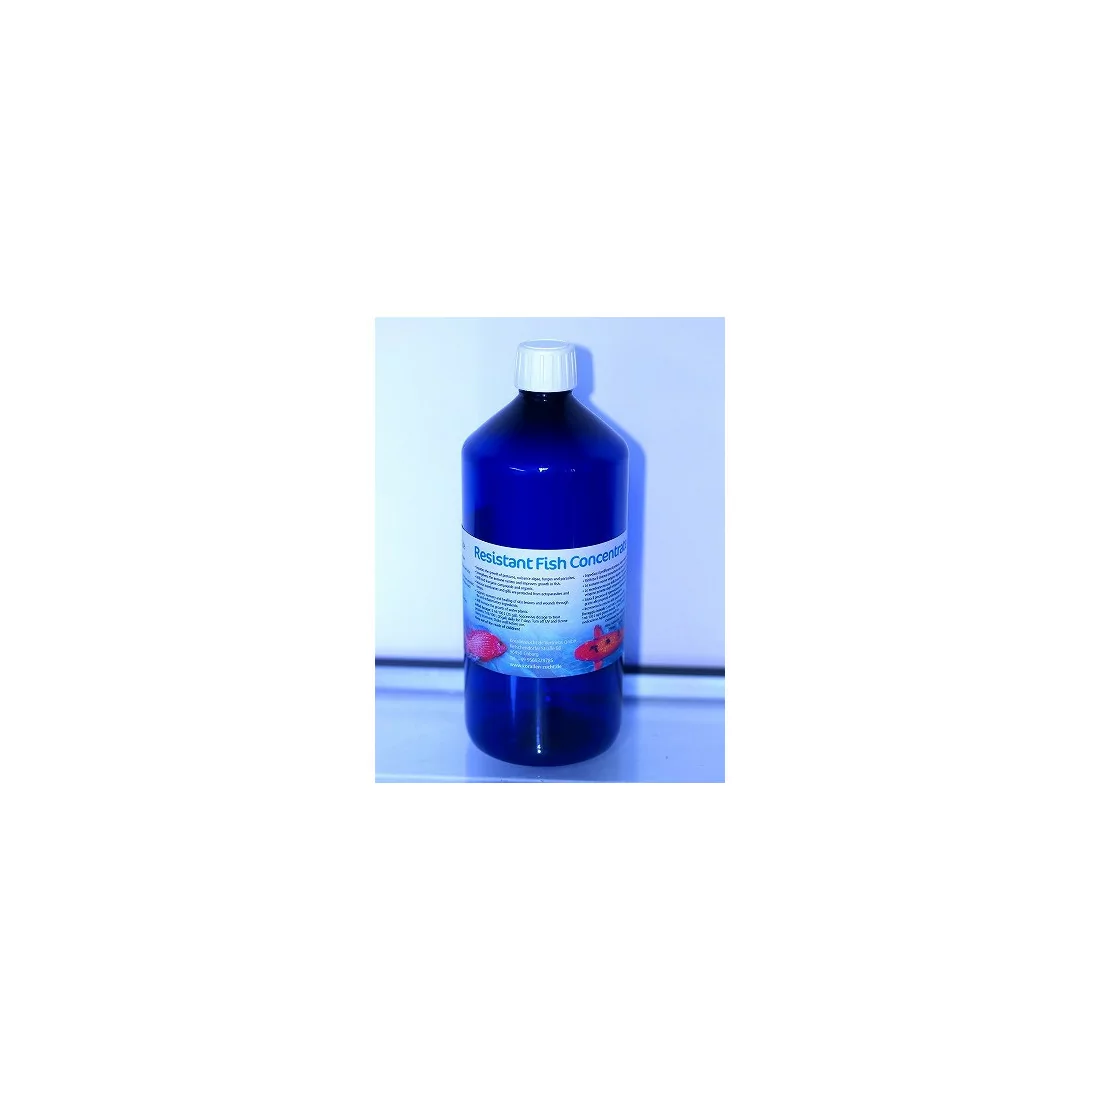 Resistant Fish Concentrate 500ml